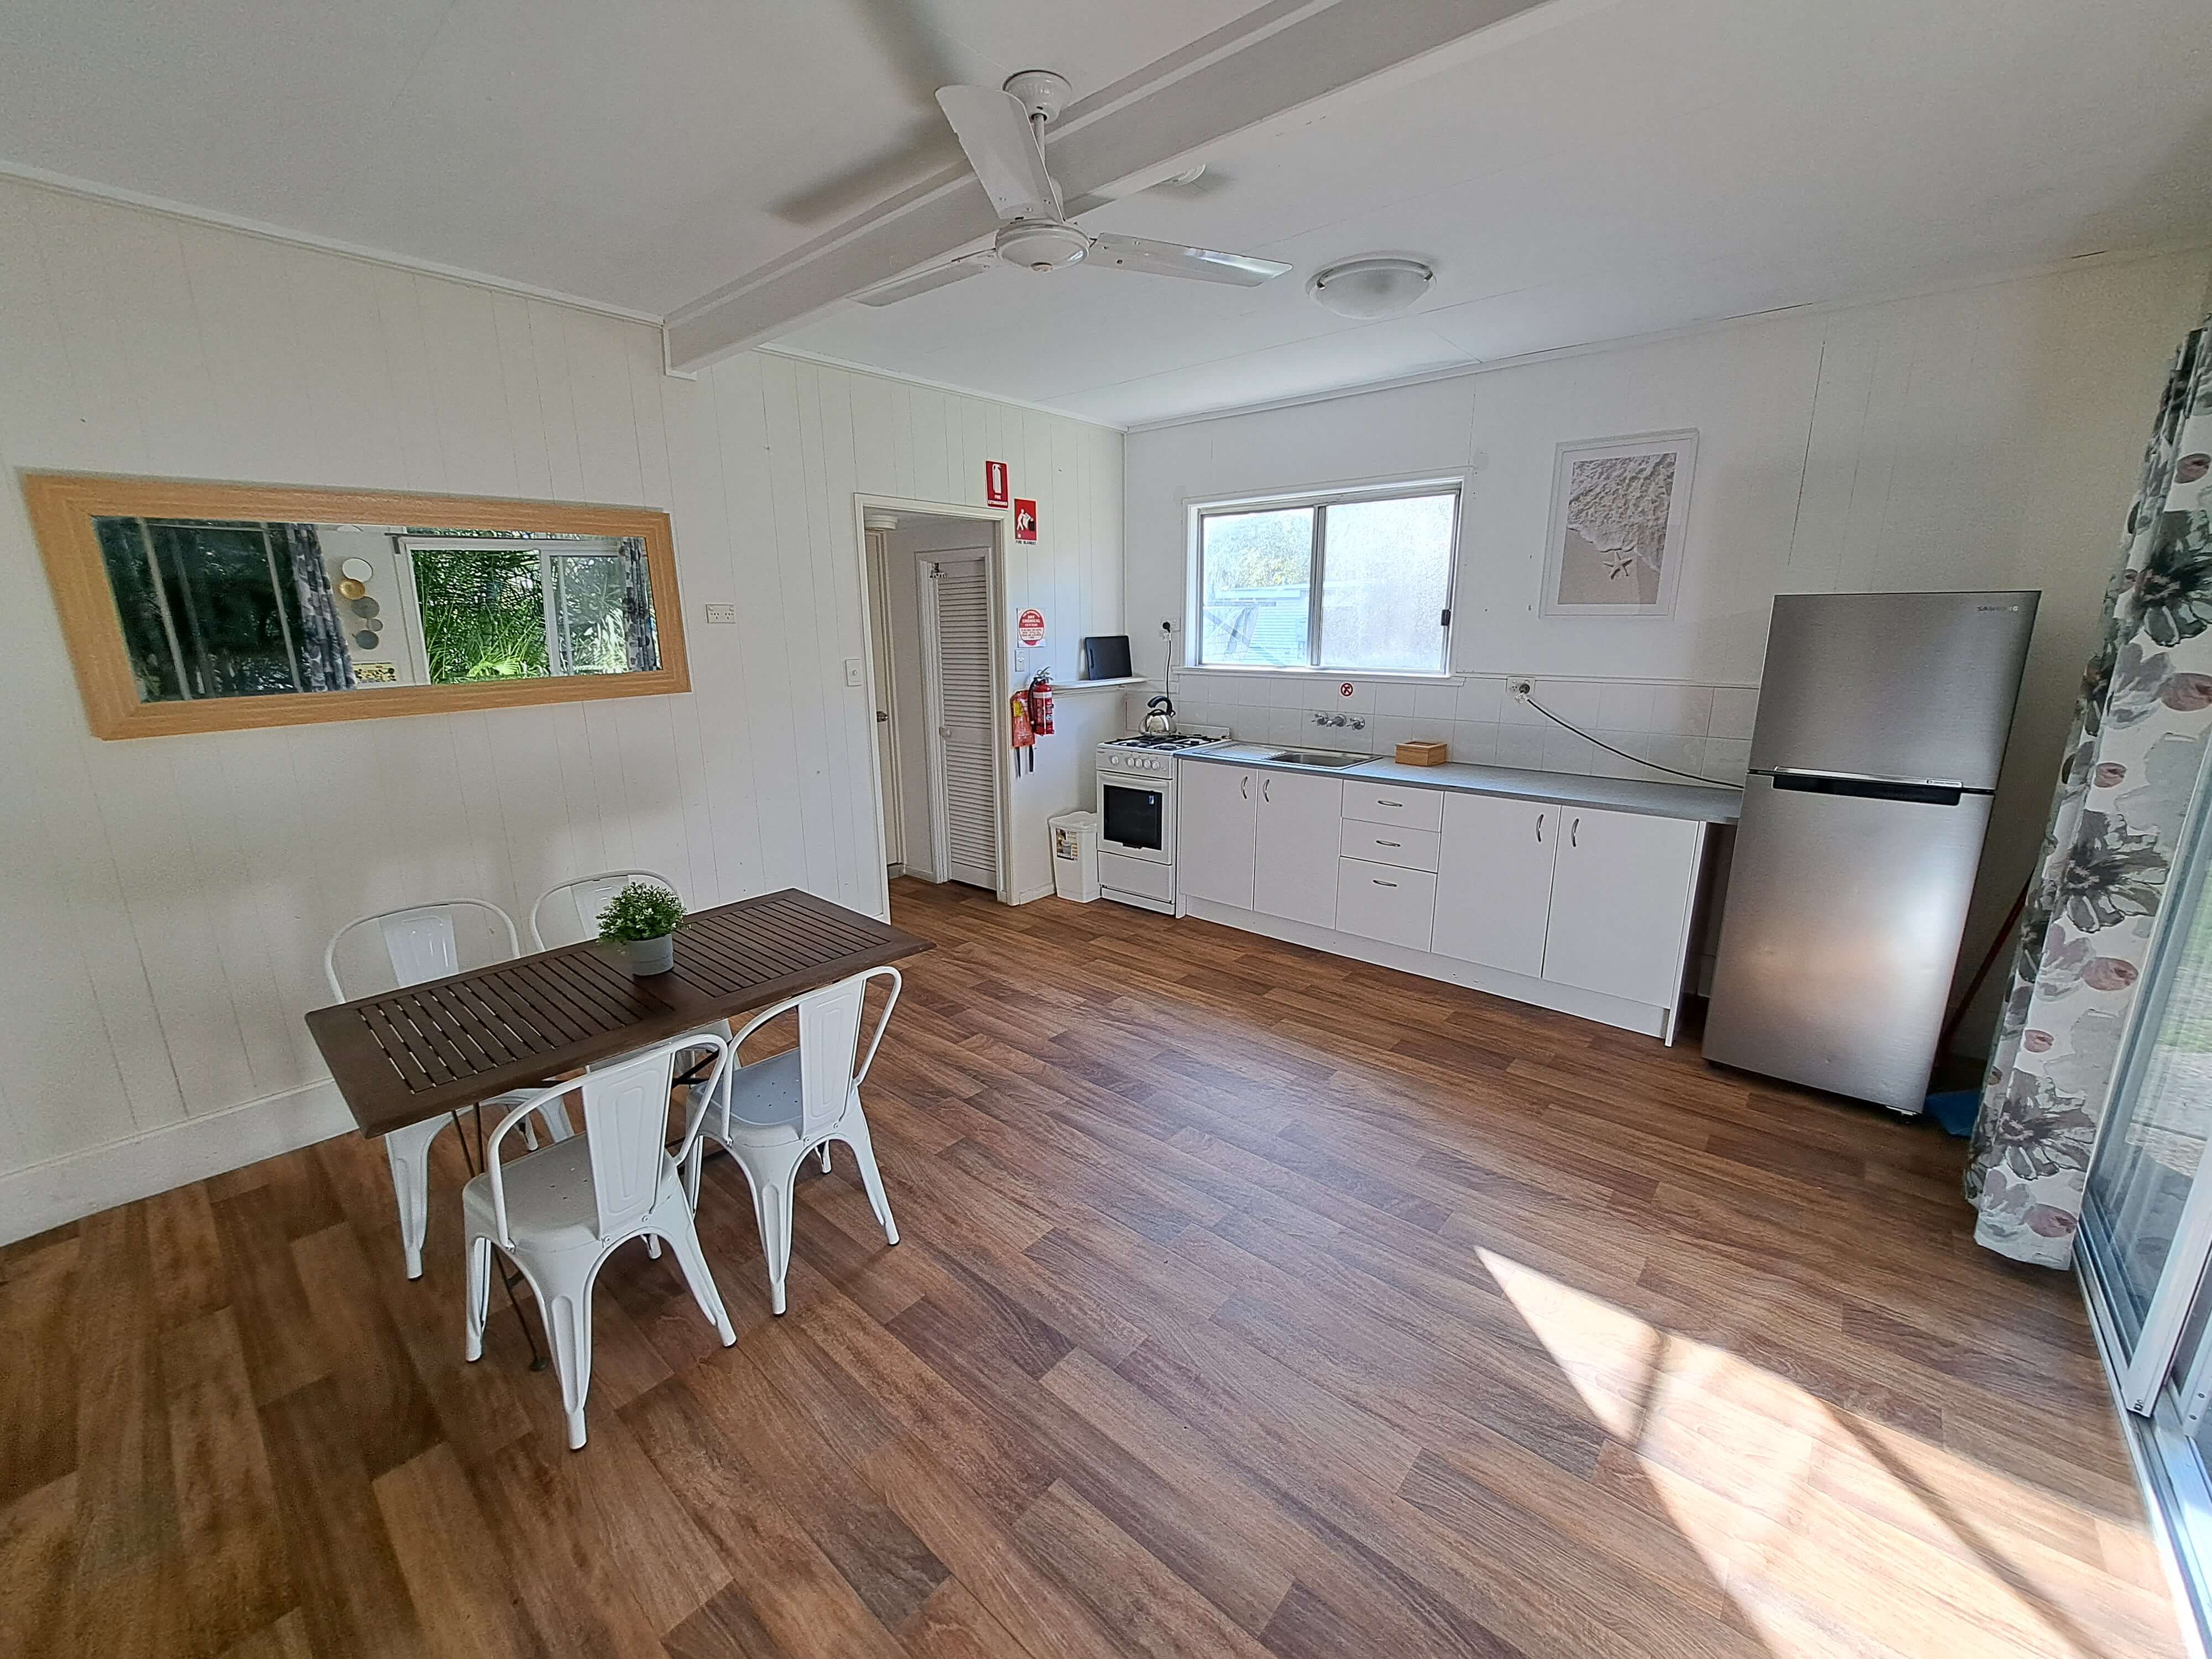 Dining Areas in the 2 bedroom holiday units at Castaways